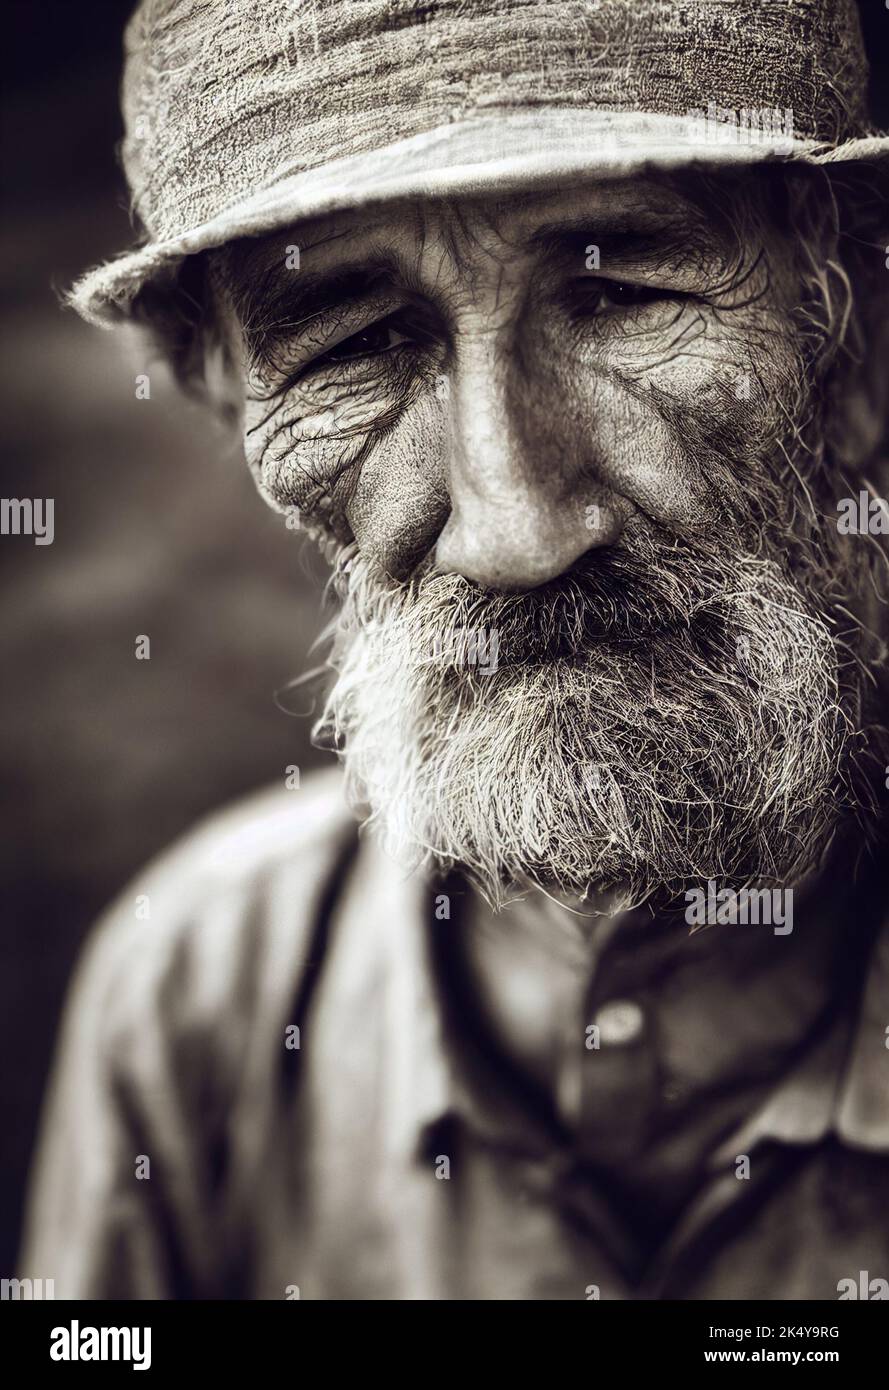 Computer-generated AI image of an old man (farmhand) - no model release required. Stock Photo